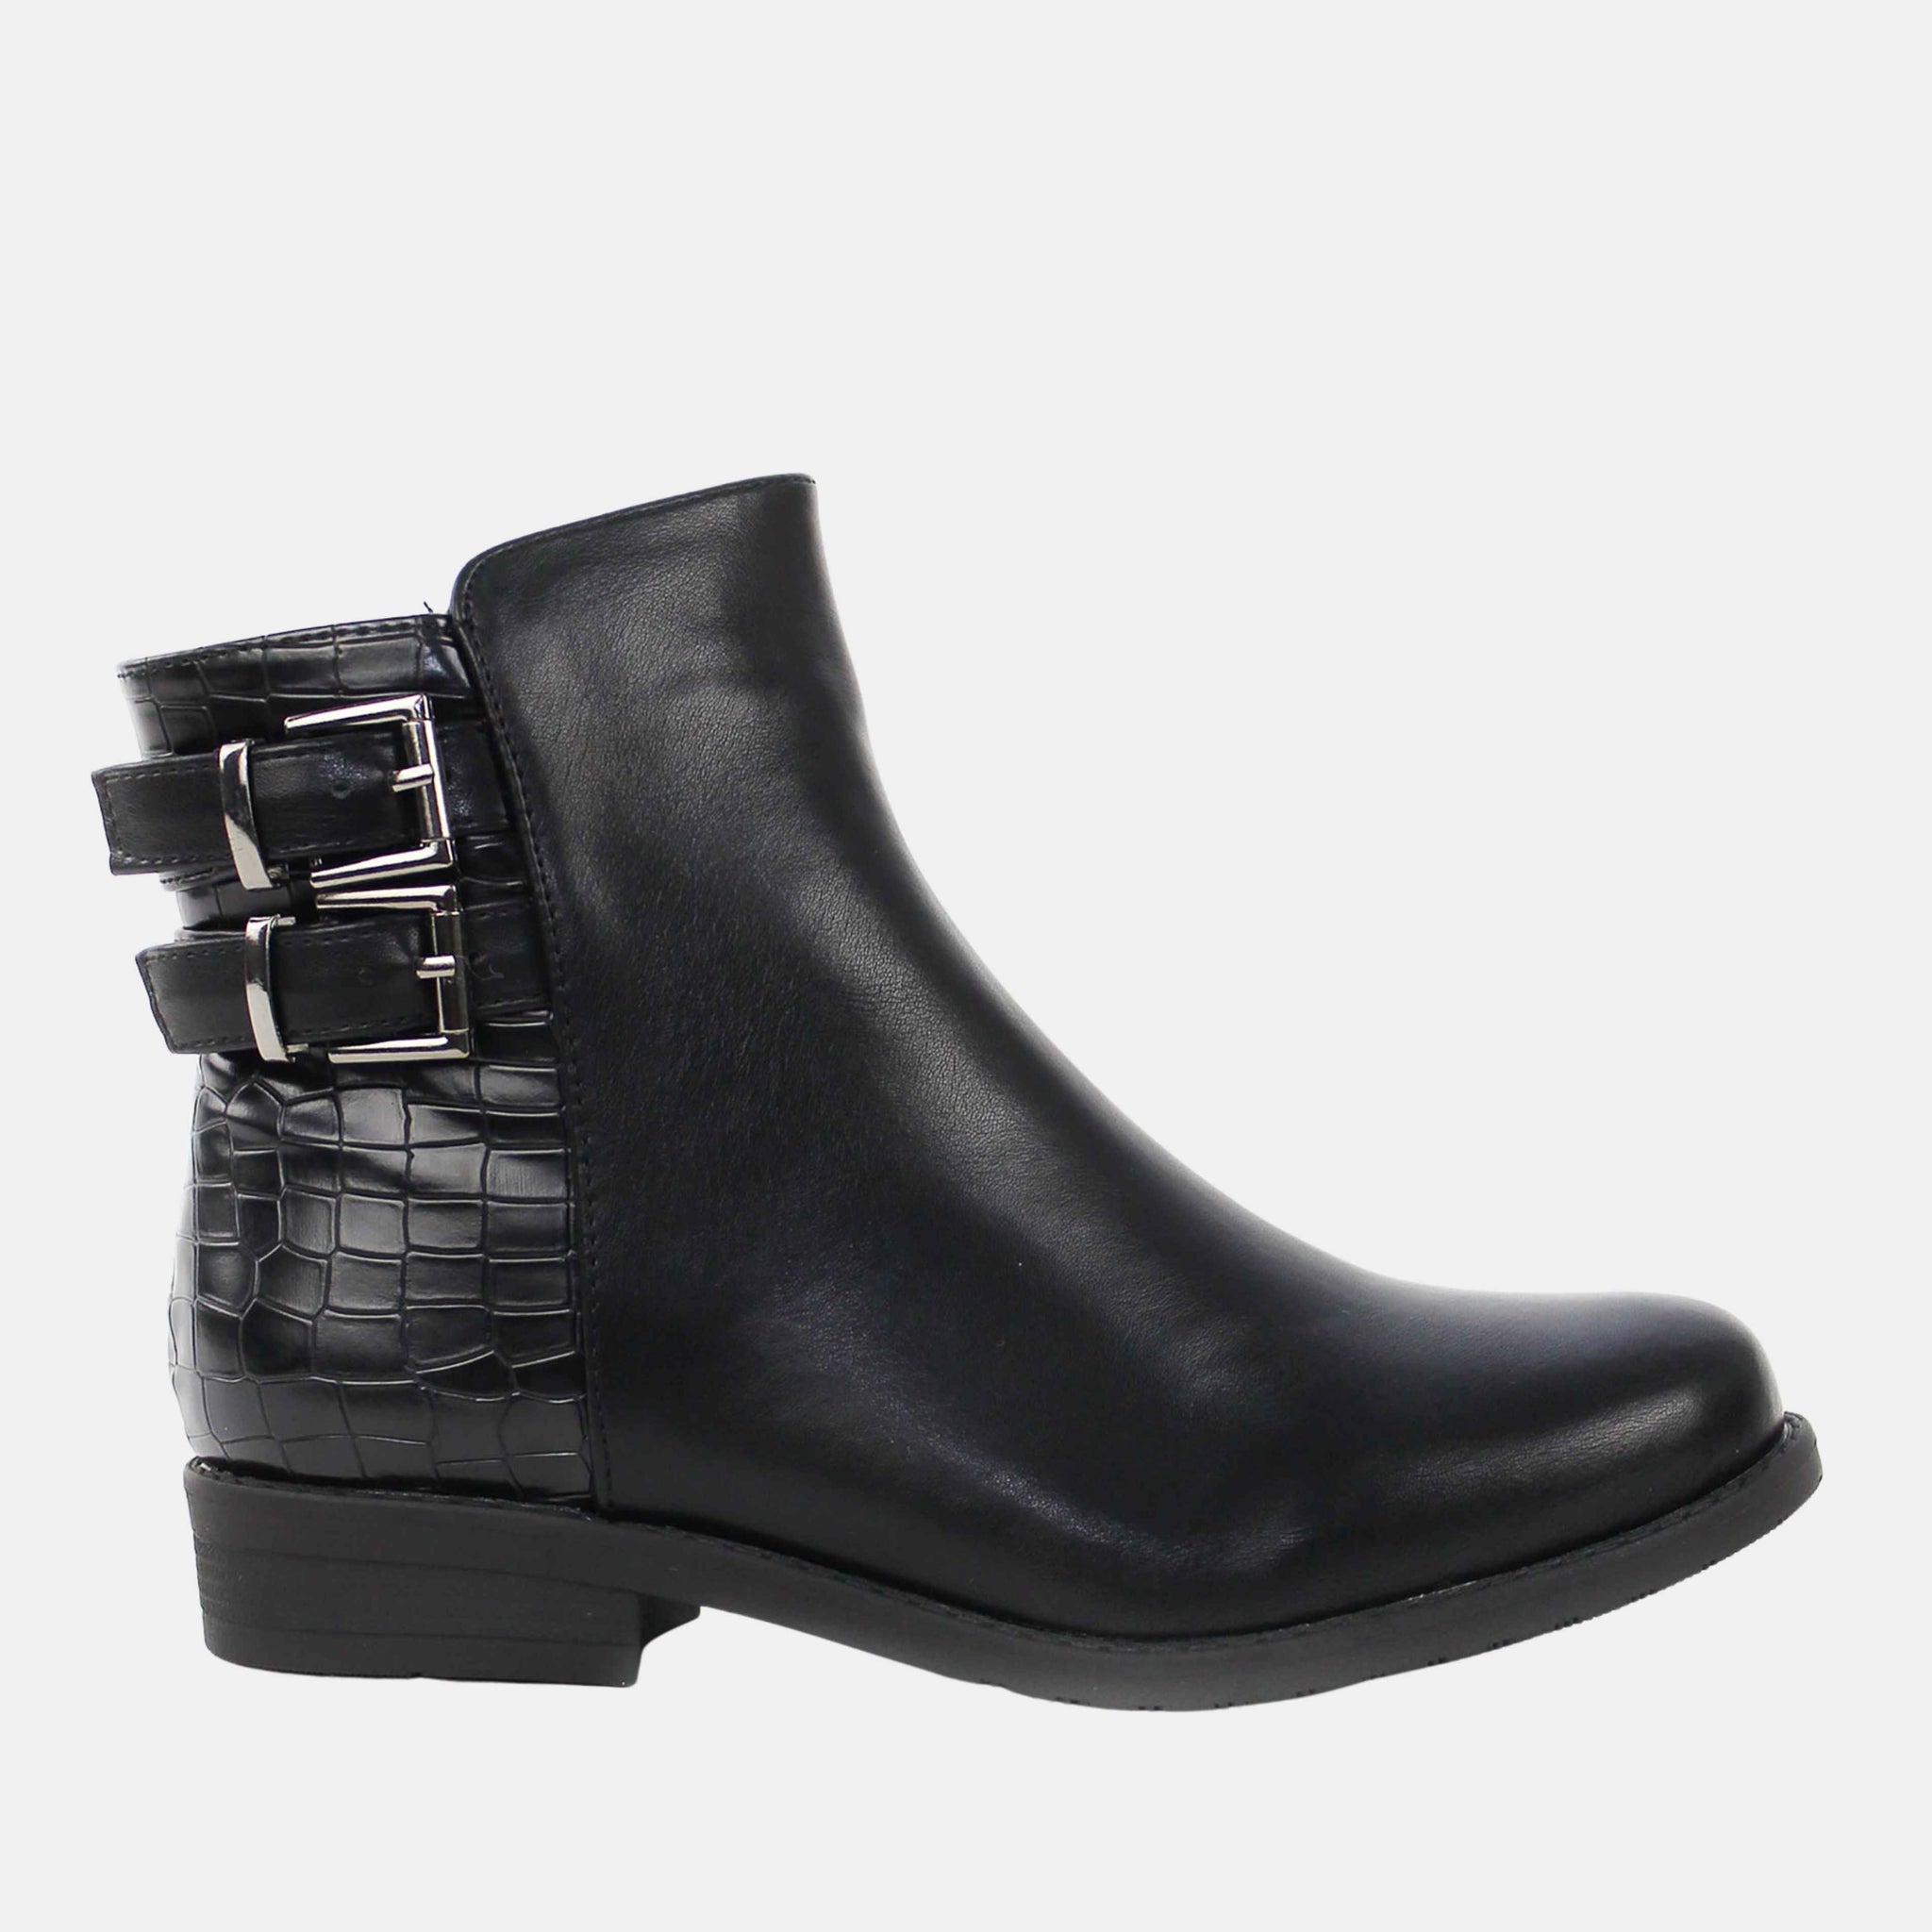 Black buckle ankle boots